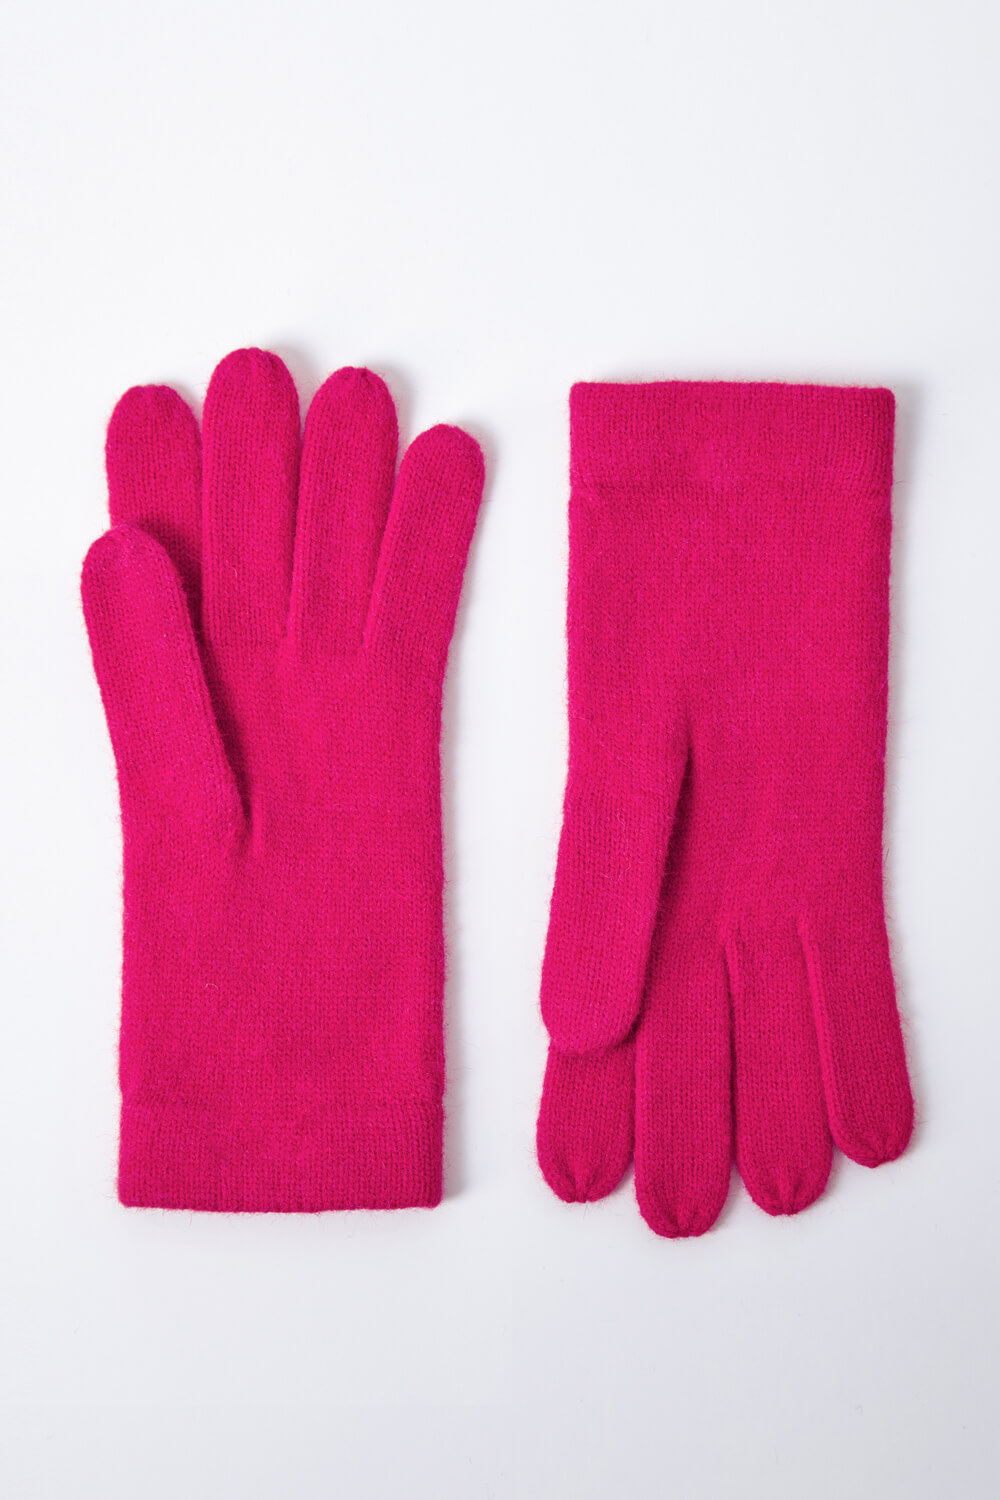 PINK One Size Stretch Knit Gloves, Image 2 of 2